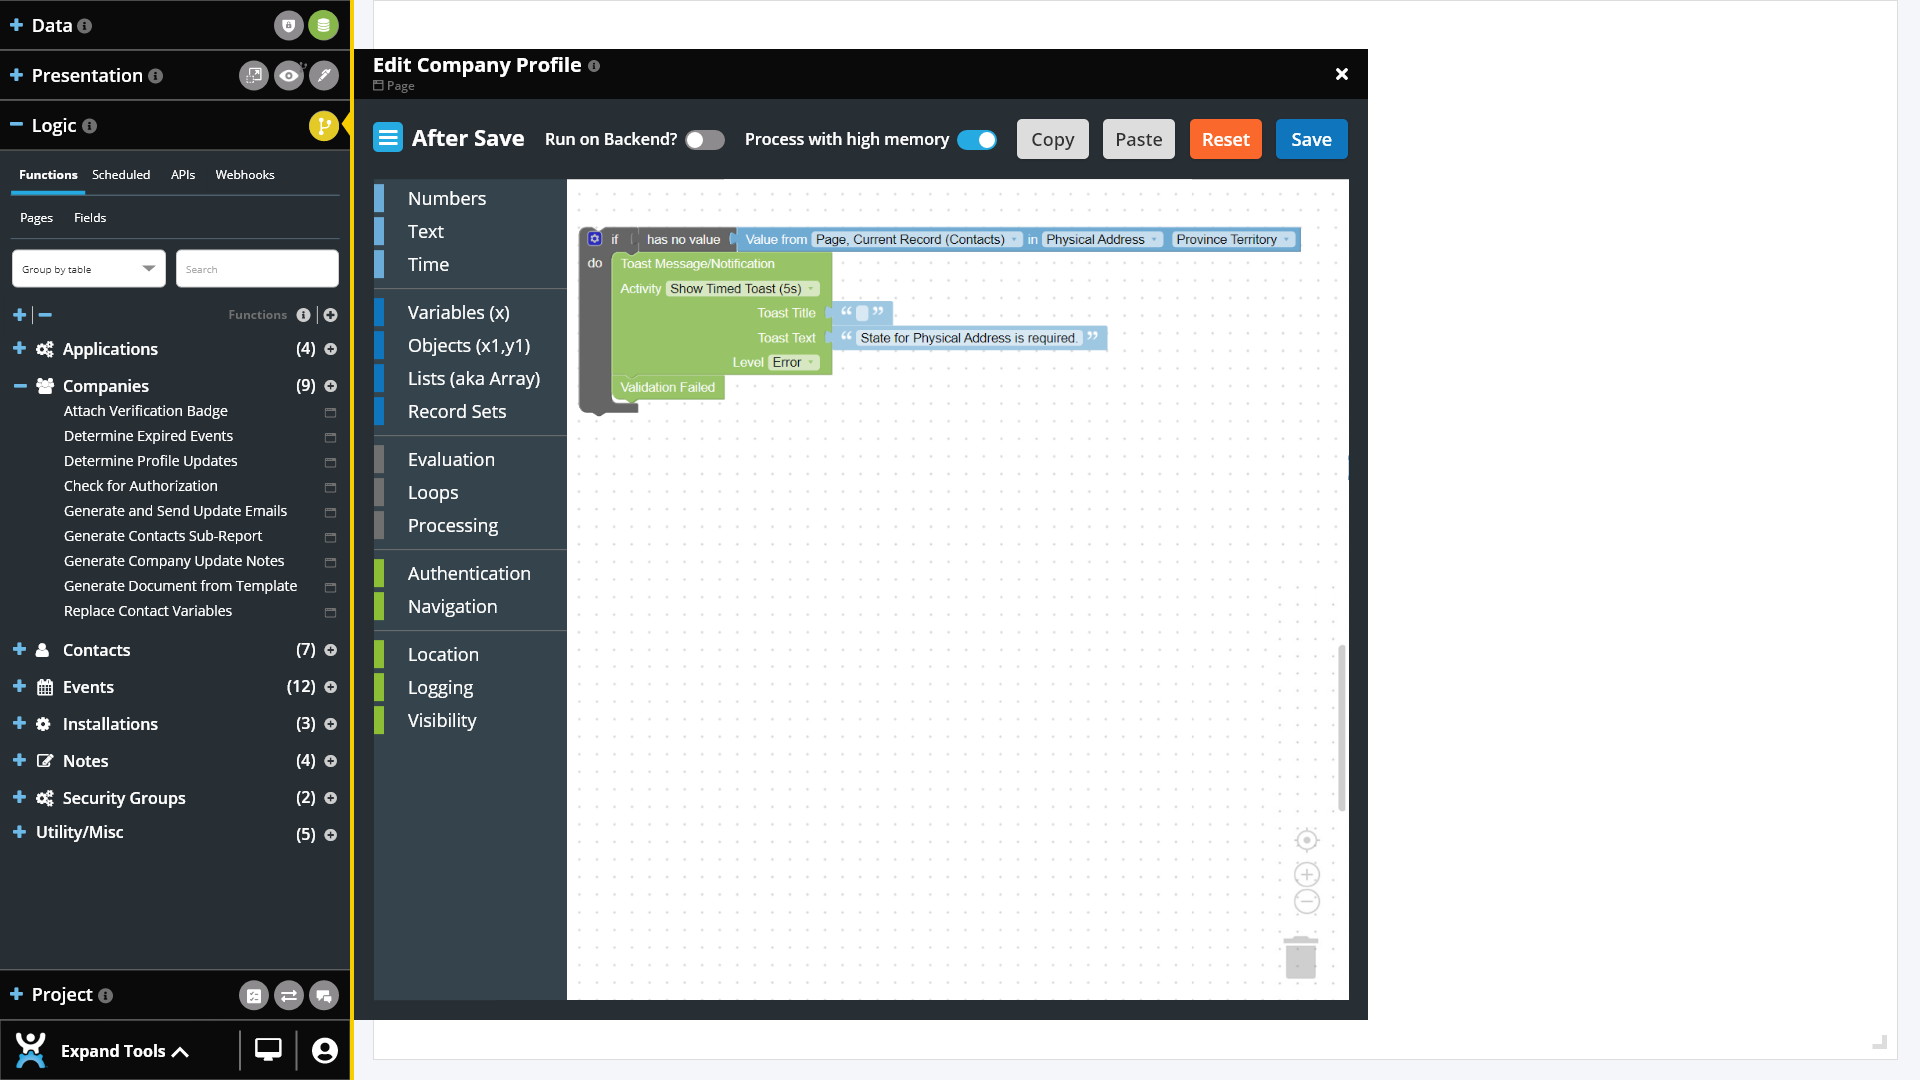 Screenshot of how to build a required workflow logic without code using the CitizenDeveloper platform tools.